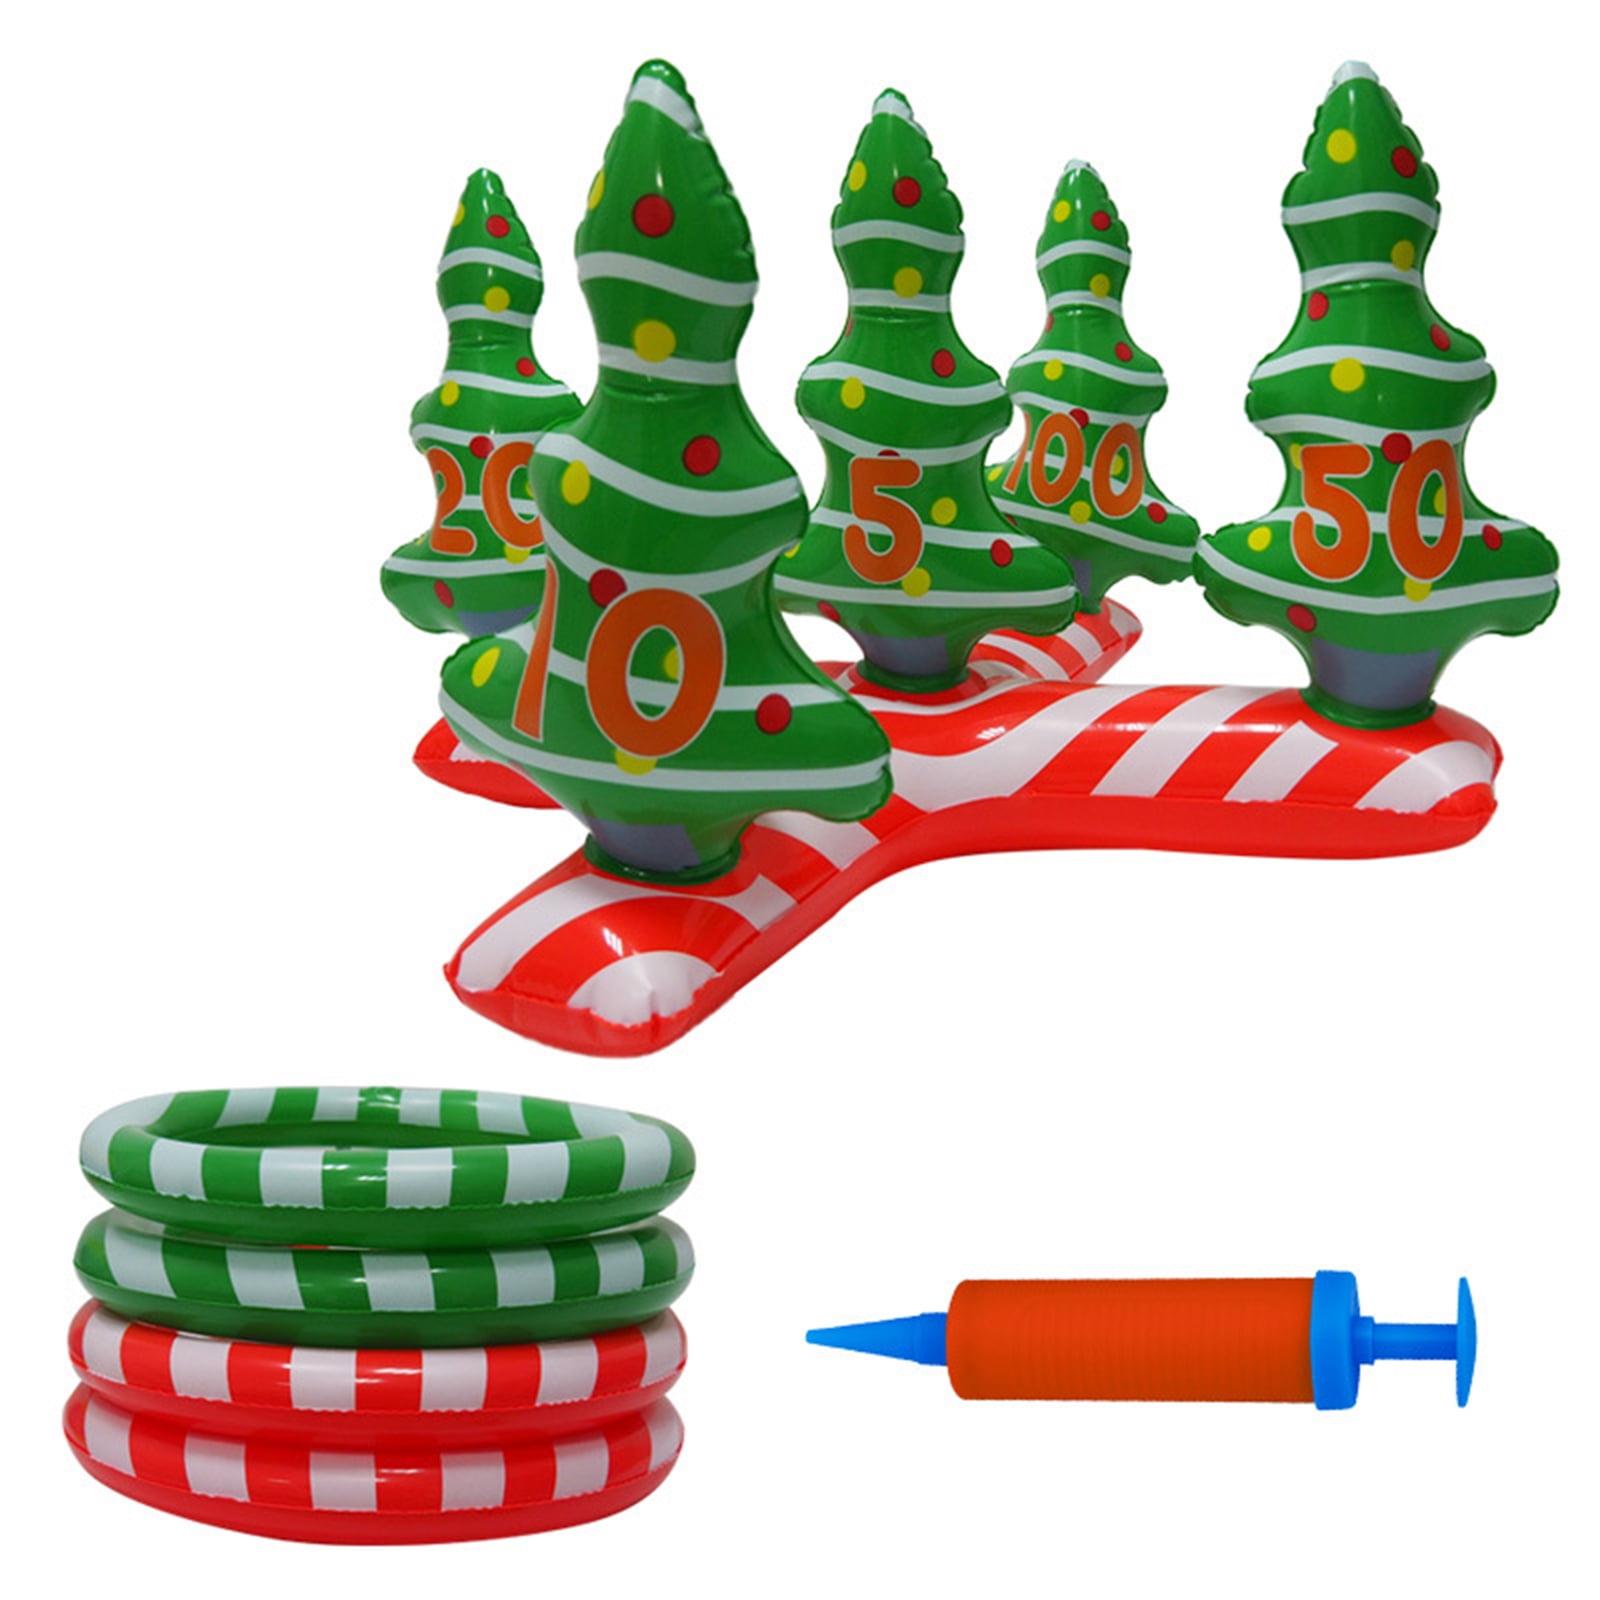 Fun Games for Xmas Party Toys Gift for Girls Boys Family Friends Toyfun Christmas Ring Toss Game Set Inflatable Santa Claus Christmas Tree Toss Game Christmas Party Outdoor Indoor Activities Games 